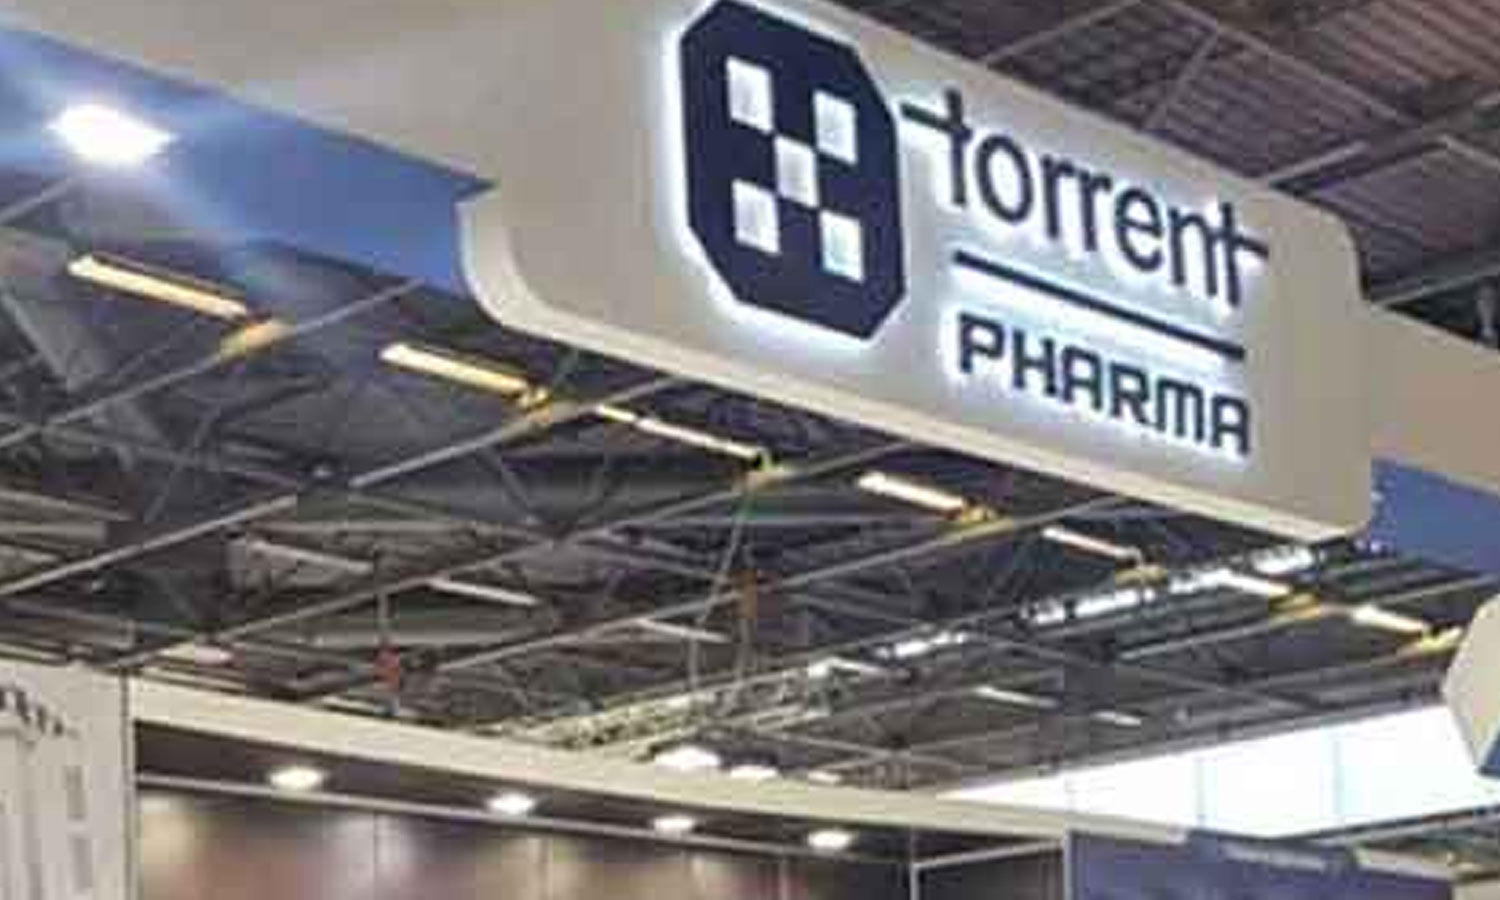 Torrent Pharma says promoters havent pledged shares